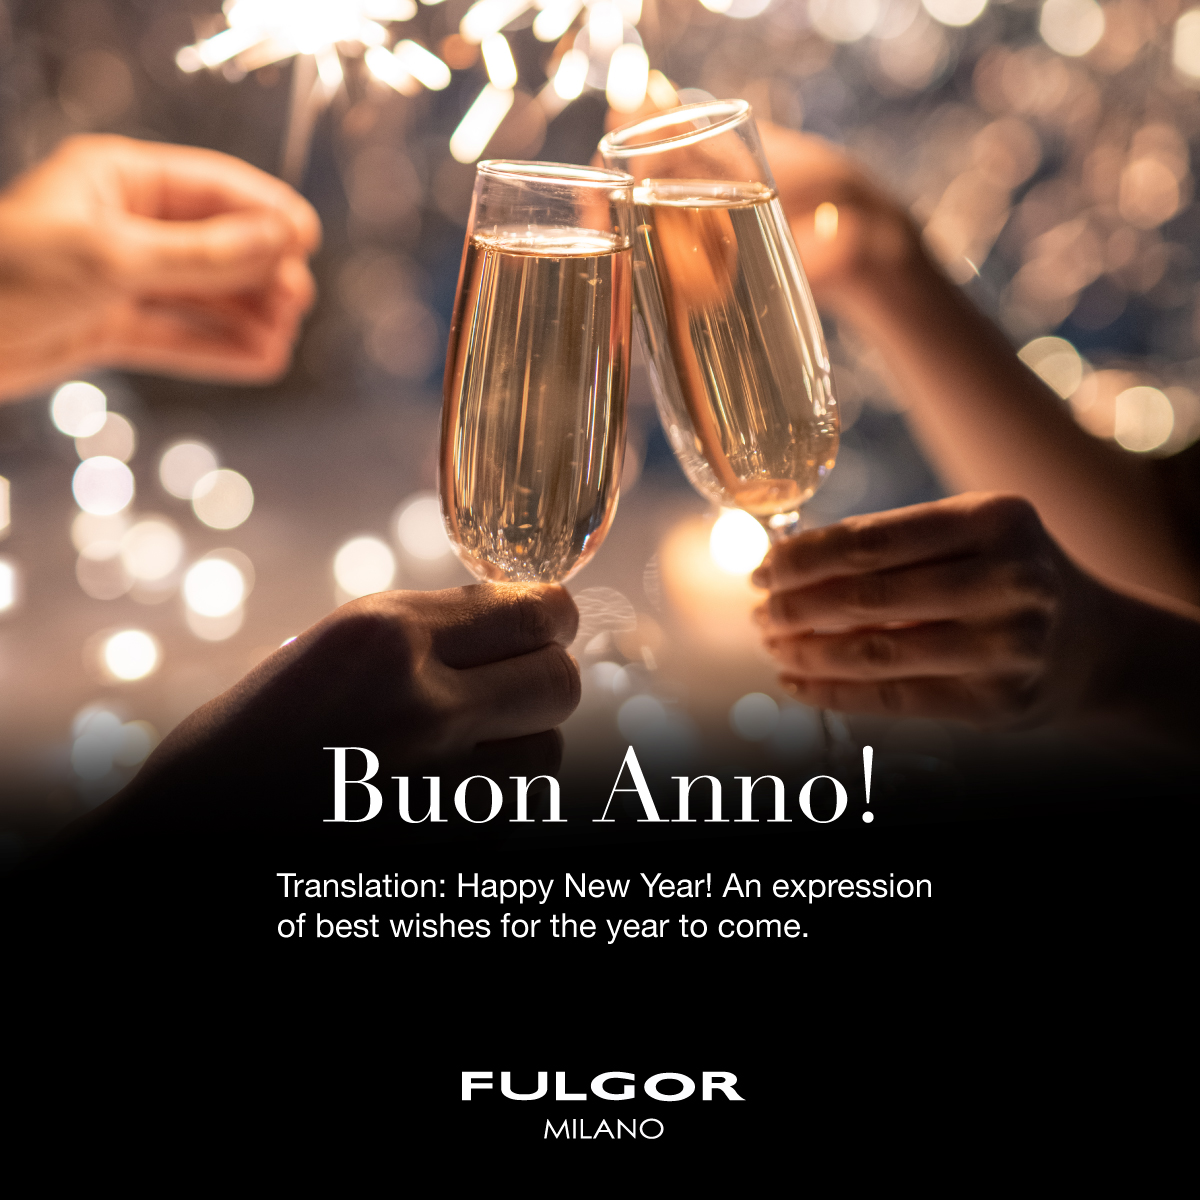 Buon Anno! 🥂
Translation: Happy New Year! An expression of best wishes for the year to come. 
#FulgorMilano #luxuryappliances #happynewyear2022